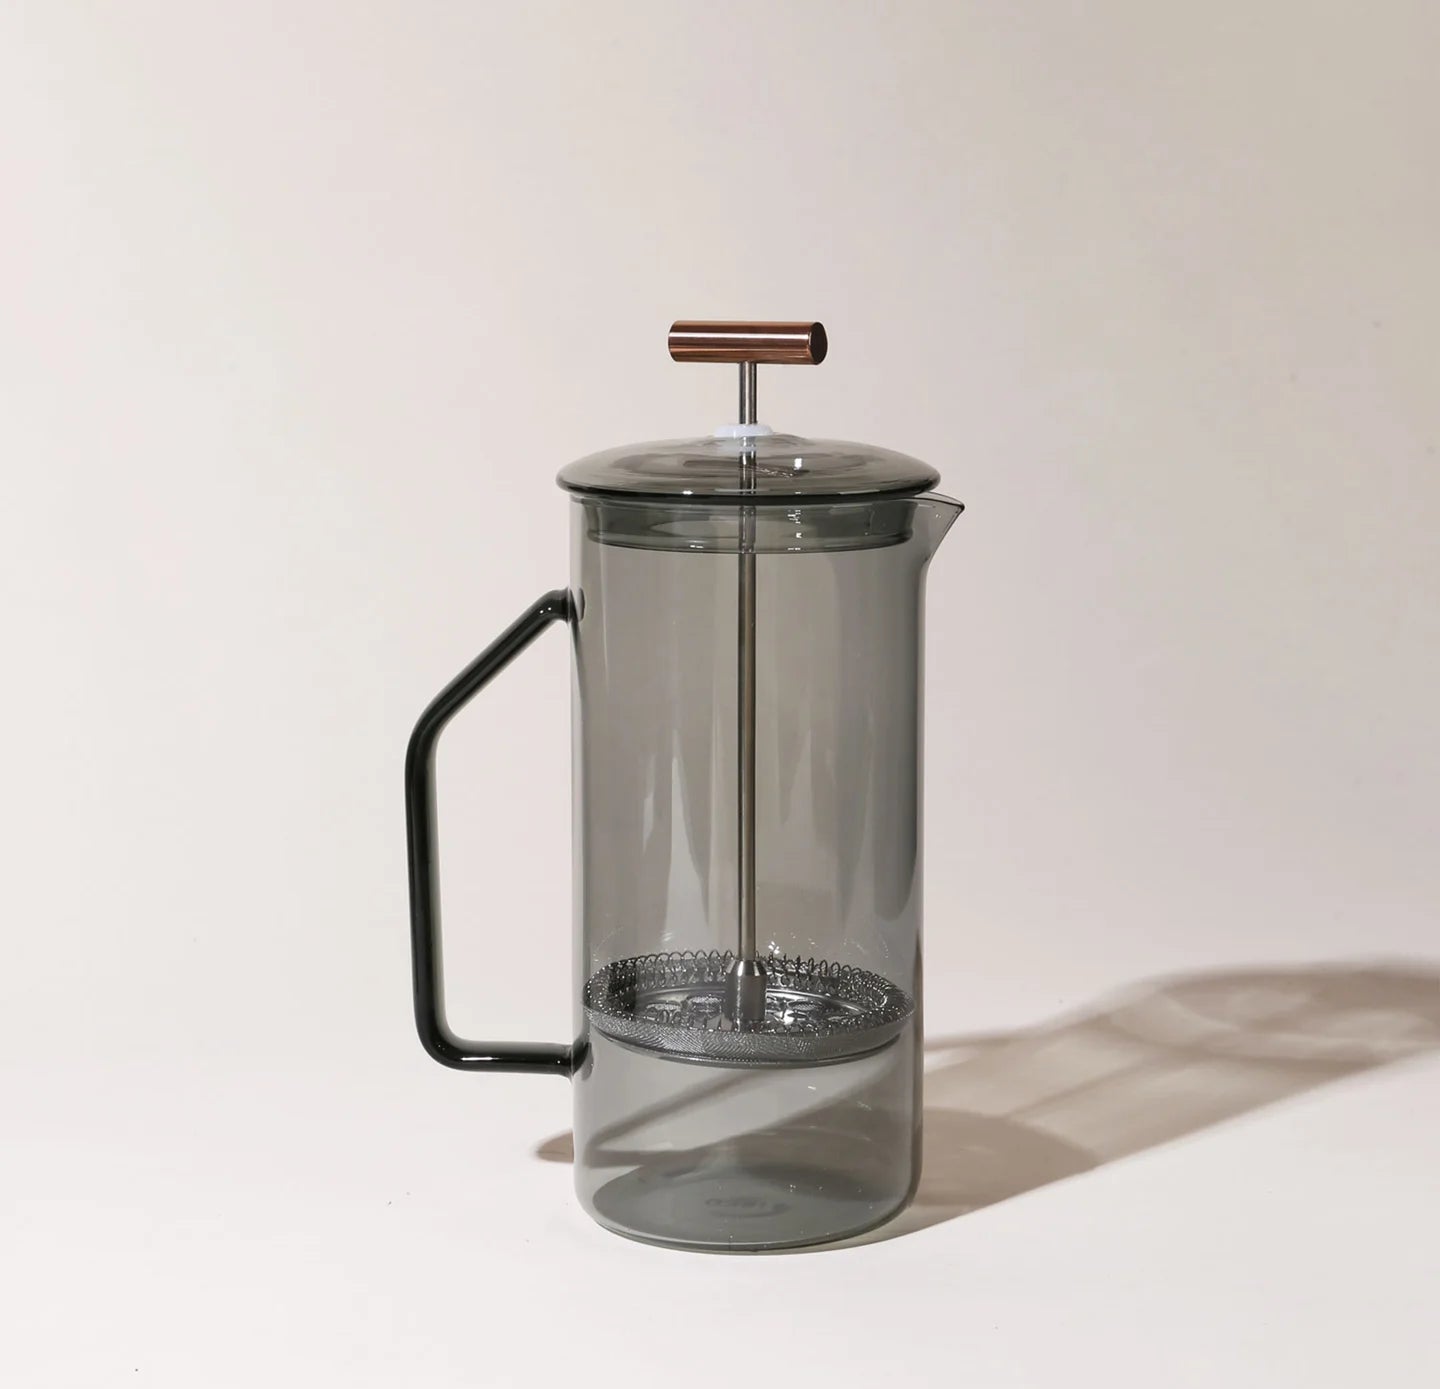 The Glass French Press - 3 choix - Yield Design